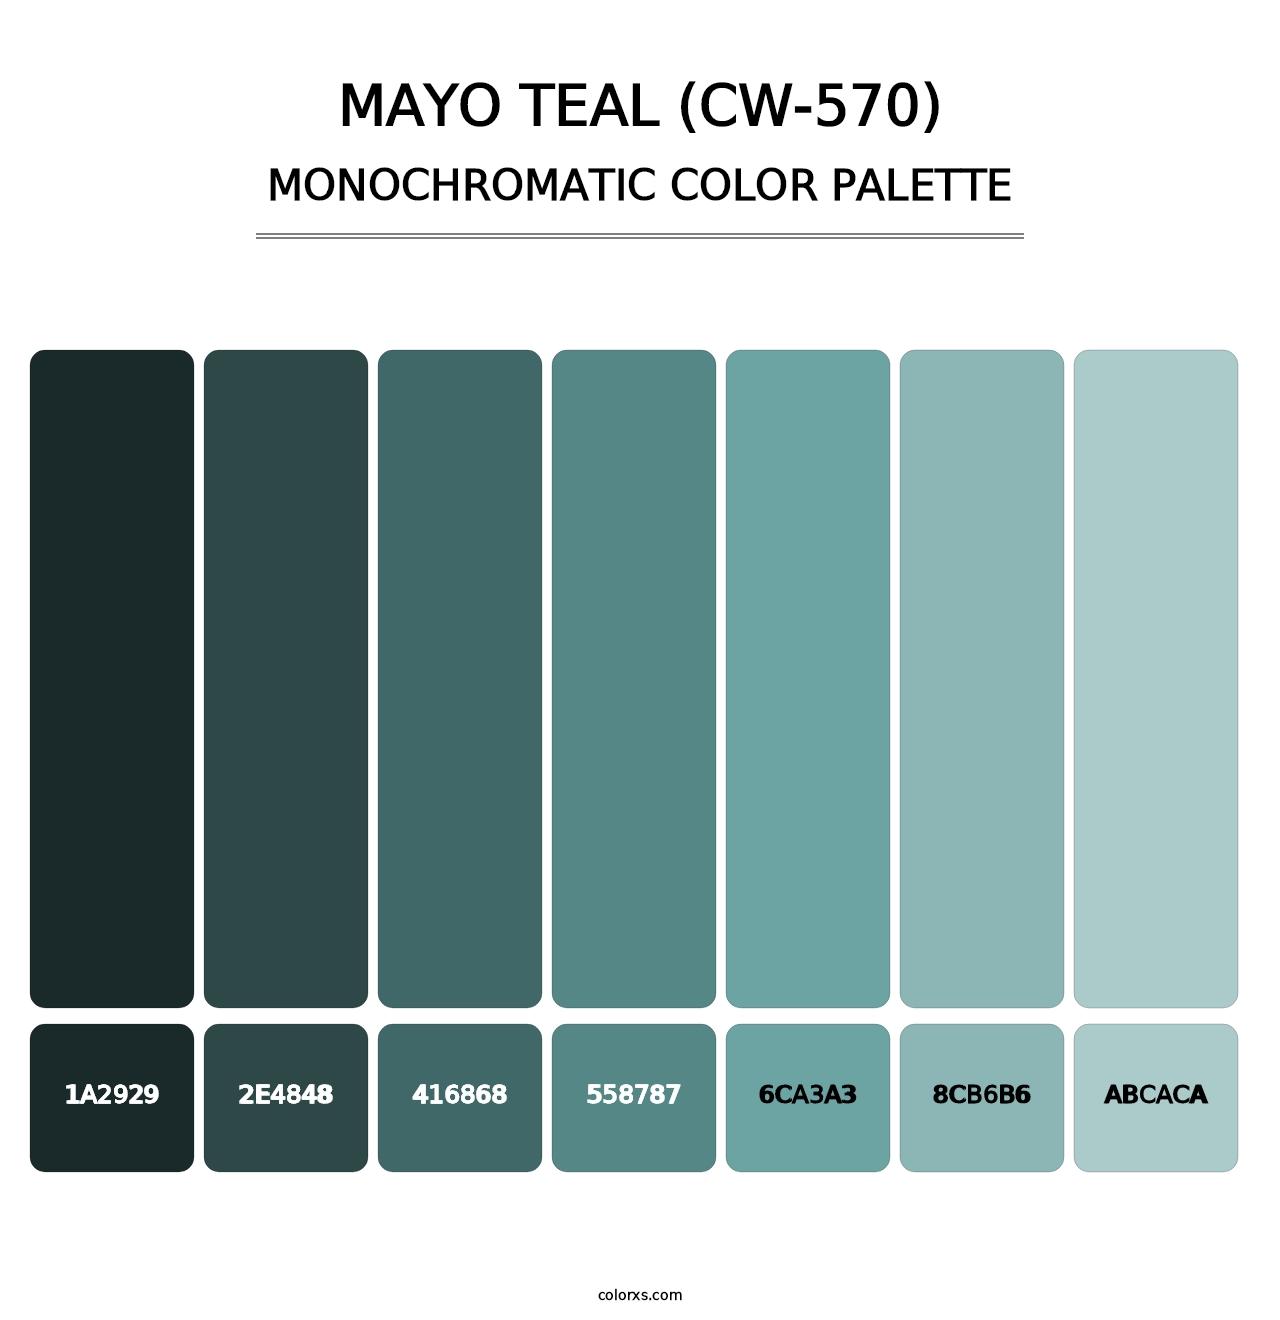 Mayo Teal (CW-570) - Monochromatic Color Palette